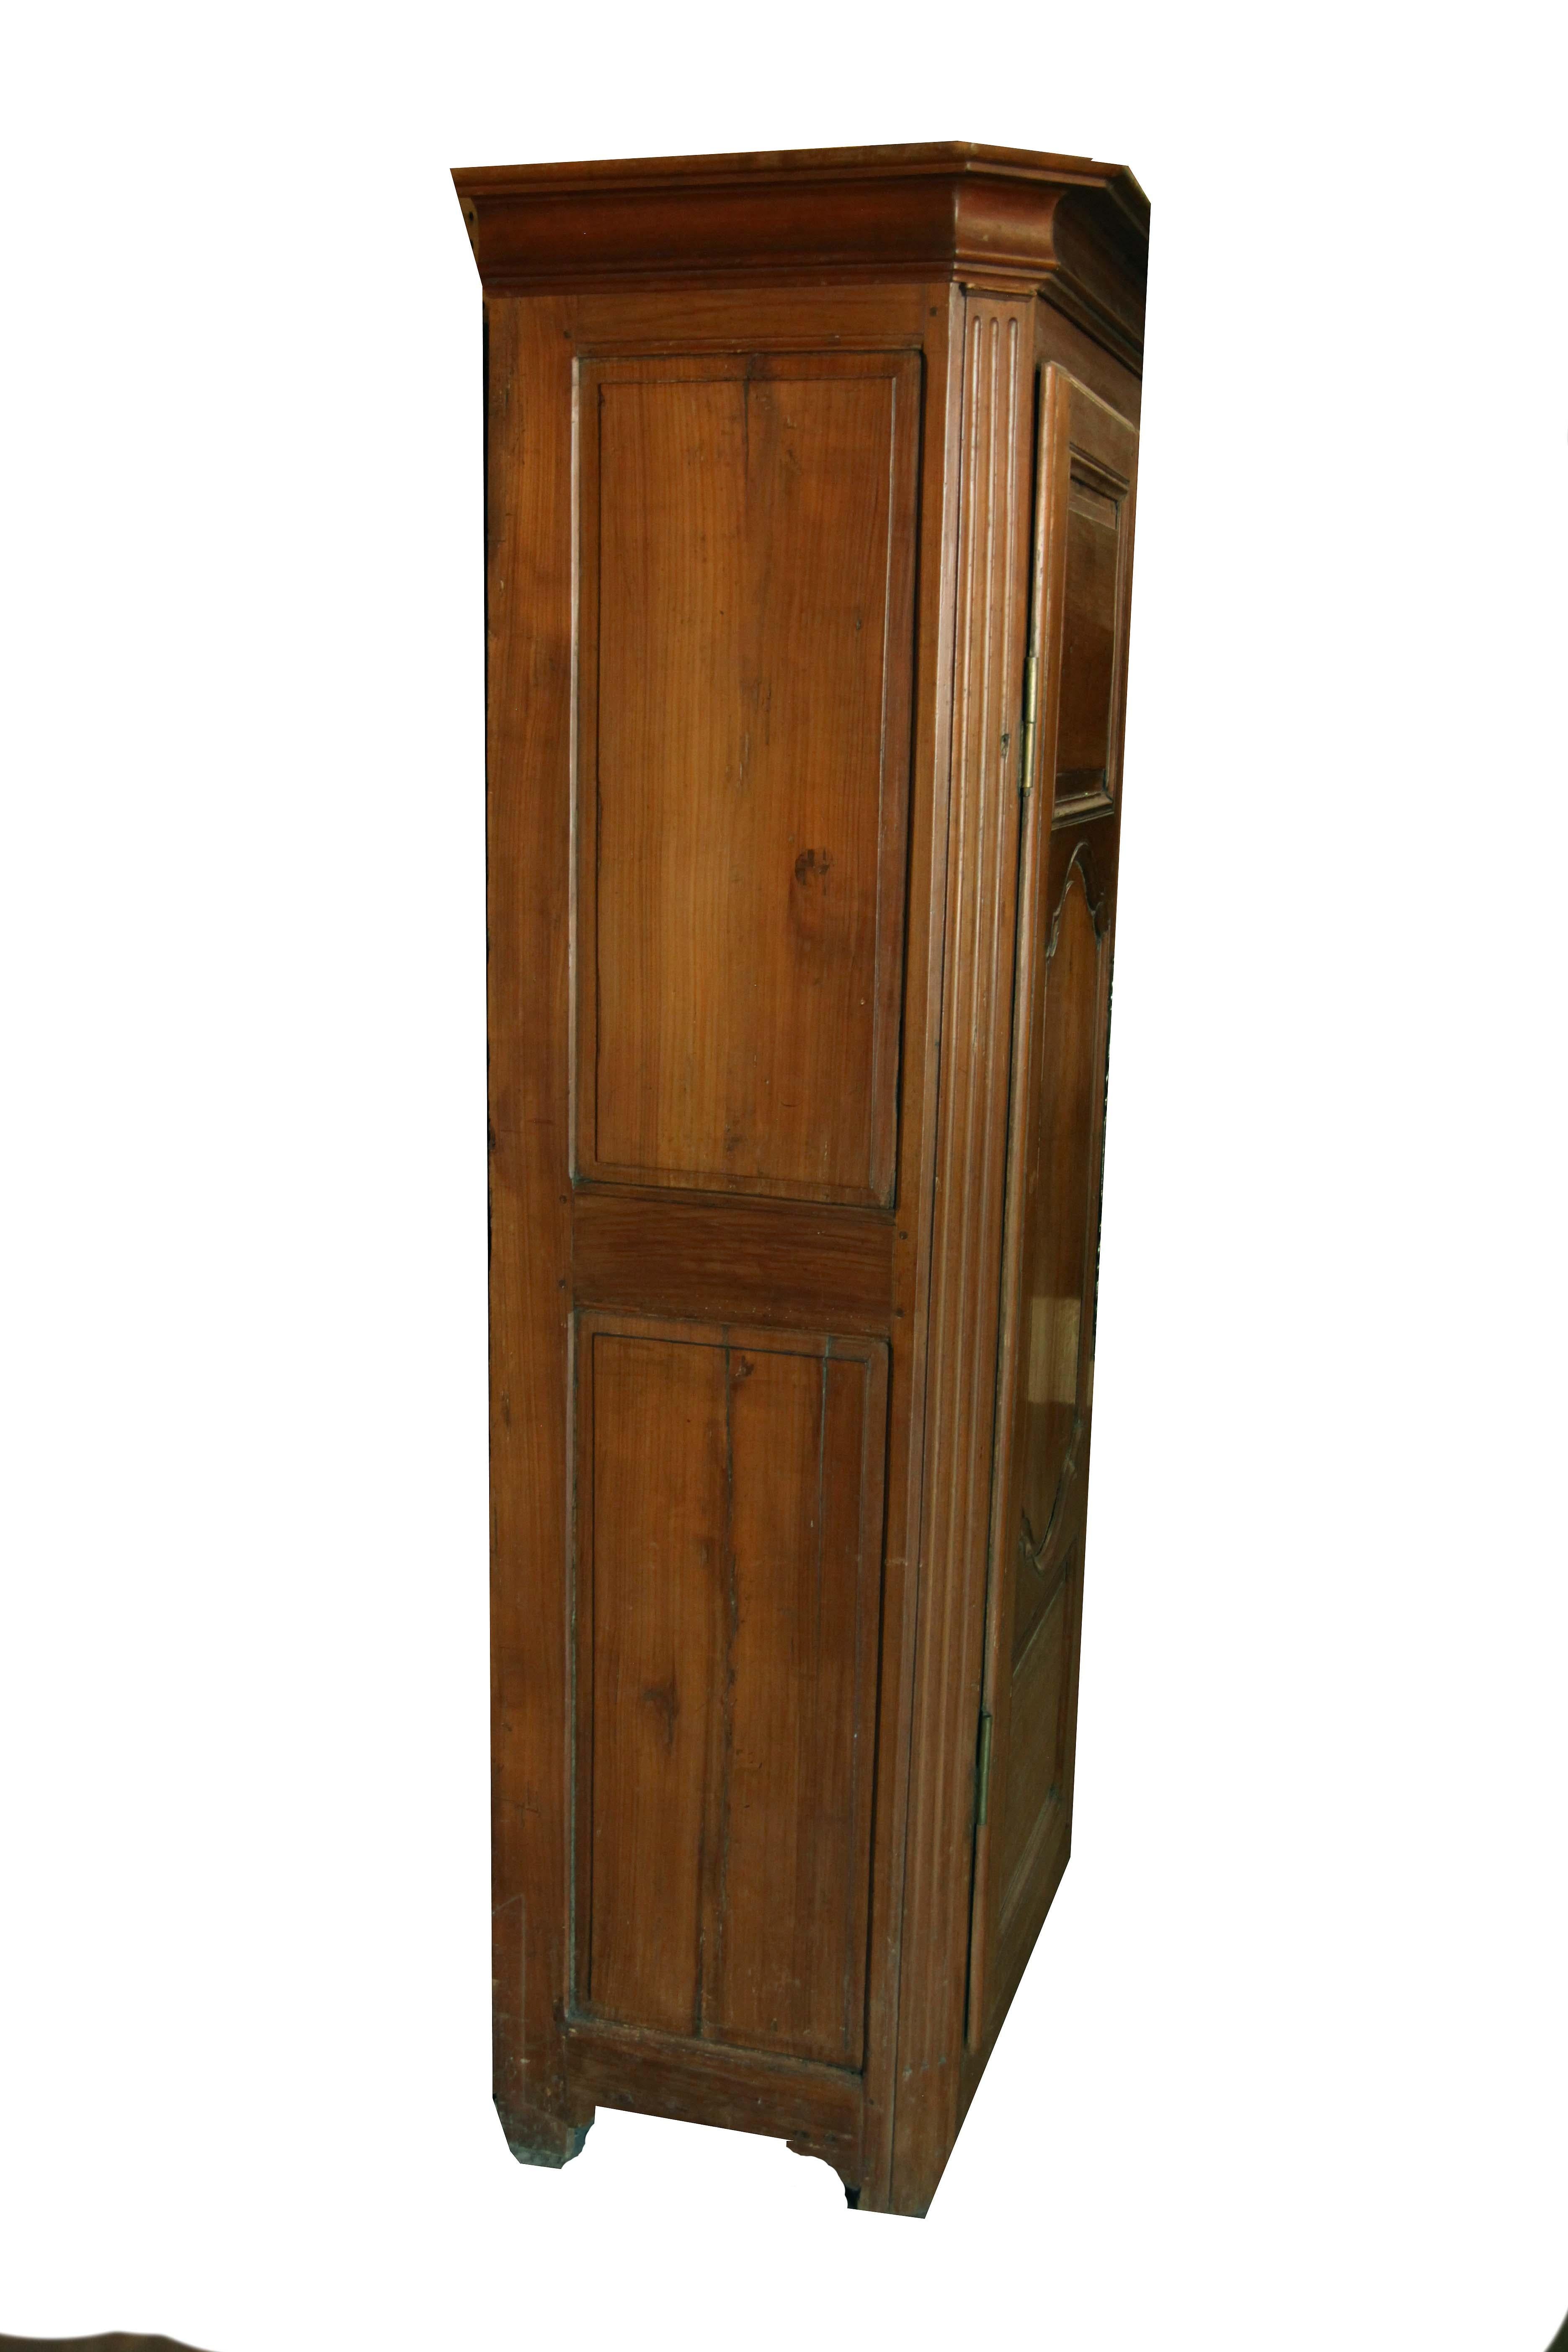 French fruit wood armoire with cove cornice ( as is typical, it is a separate detached piece ) , the sides with two raised panels, chamfered corners with full length reeding; the double doors with raised square panels above and below shaped raised